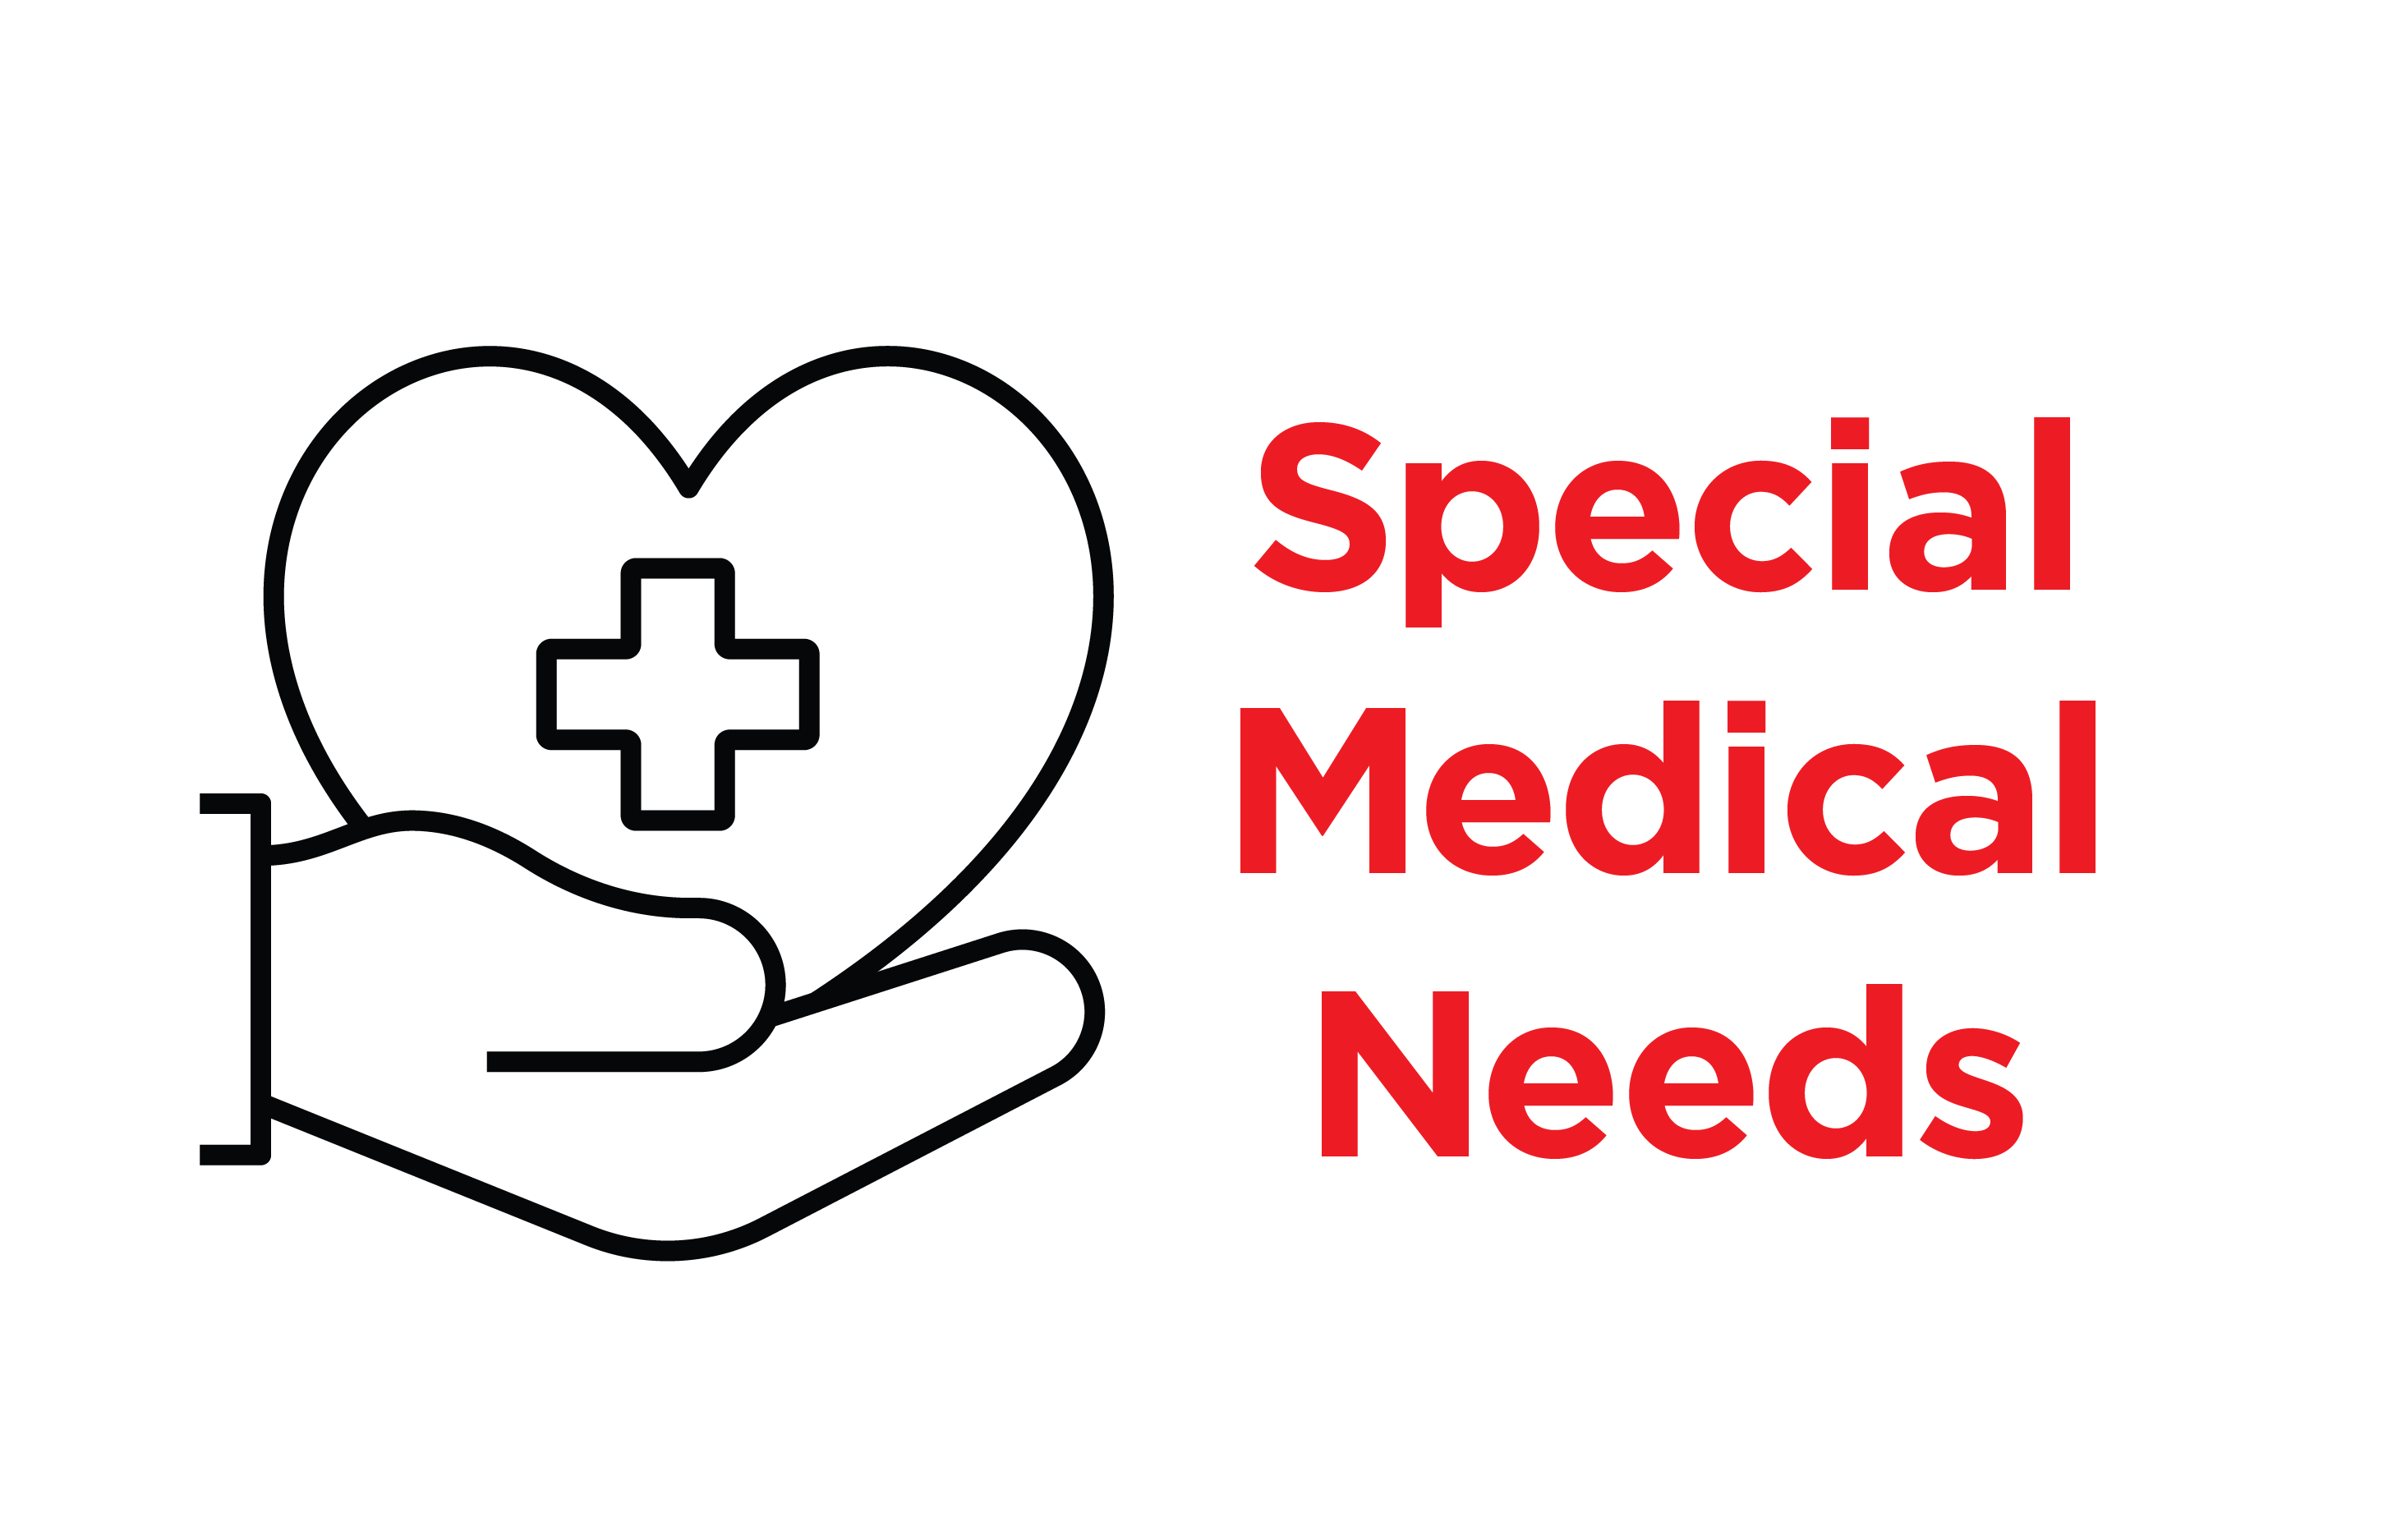 Special Medical Needs